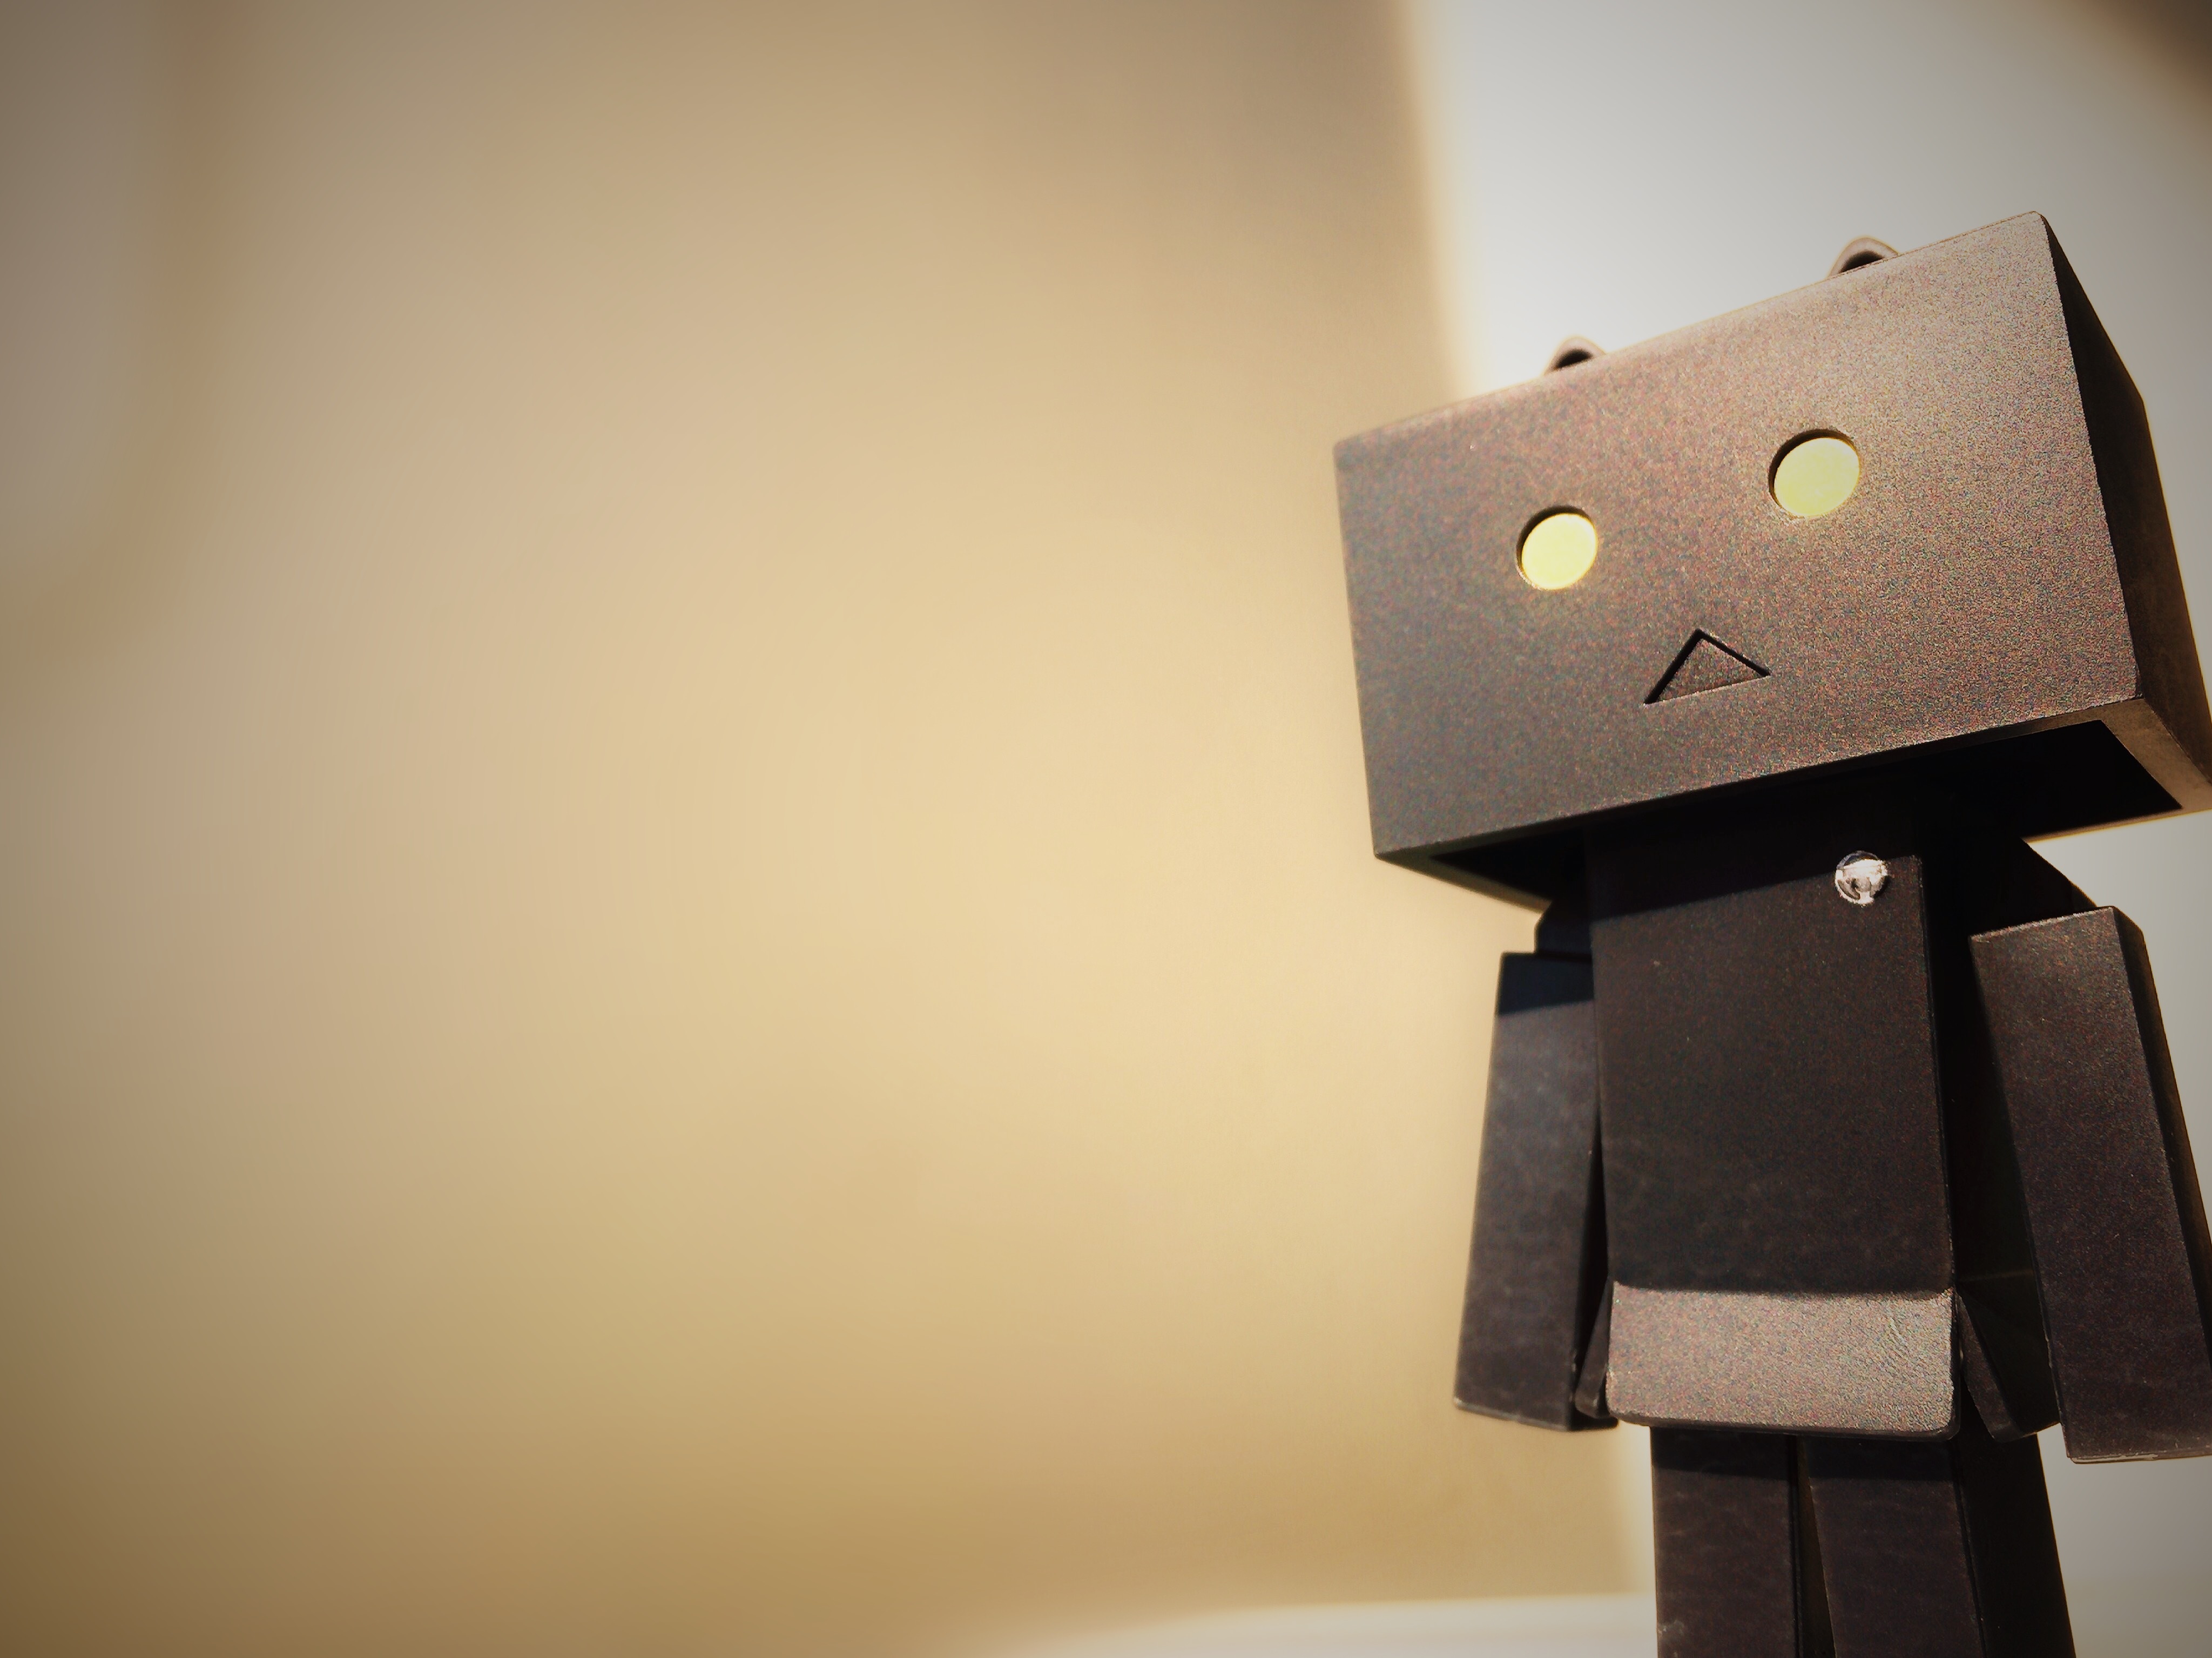 Cardboard robot thinking about how to become more creative and productive